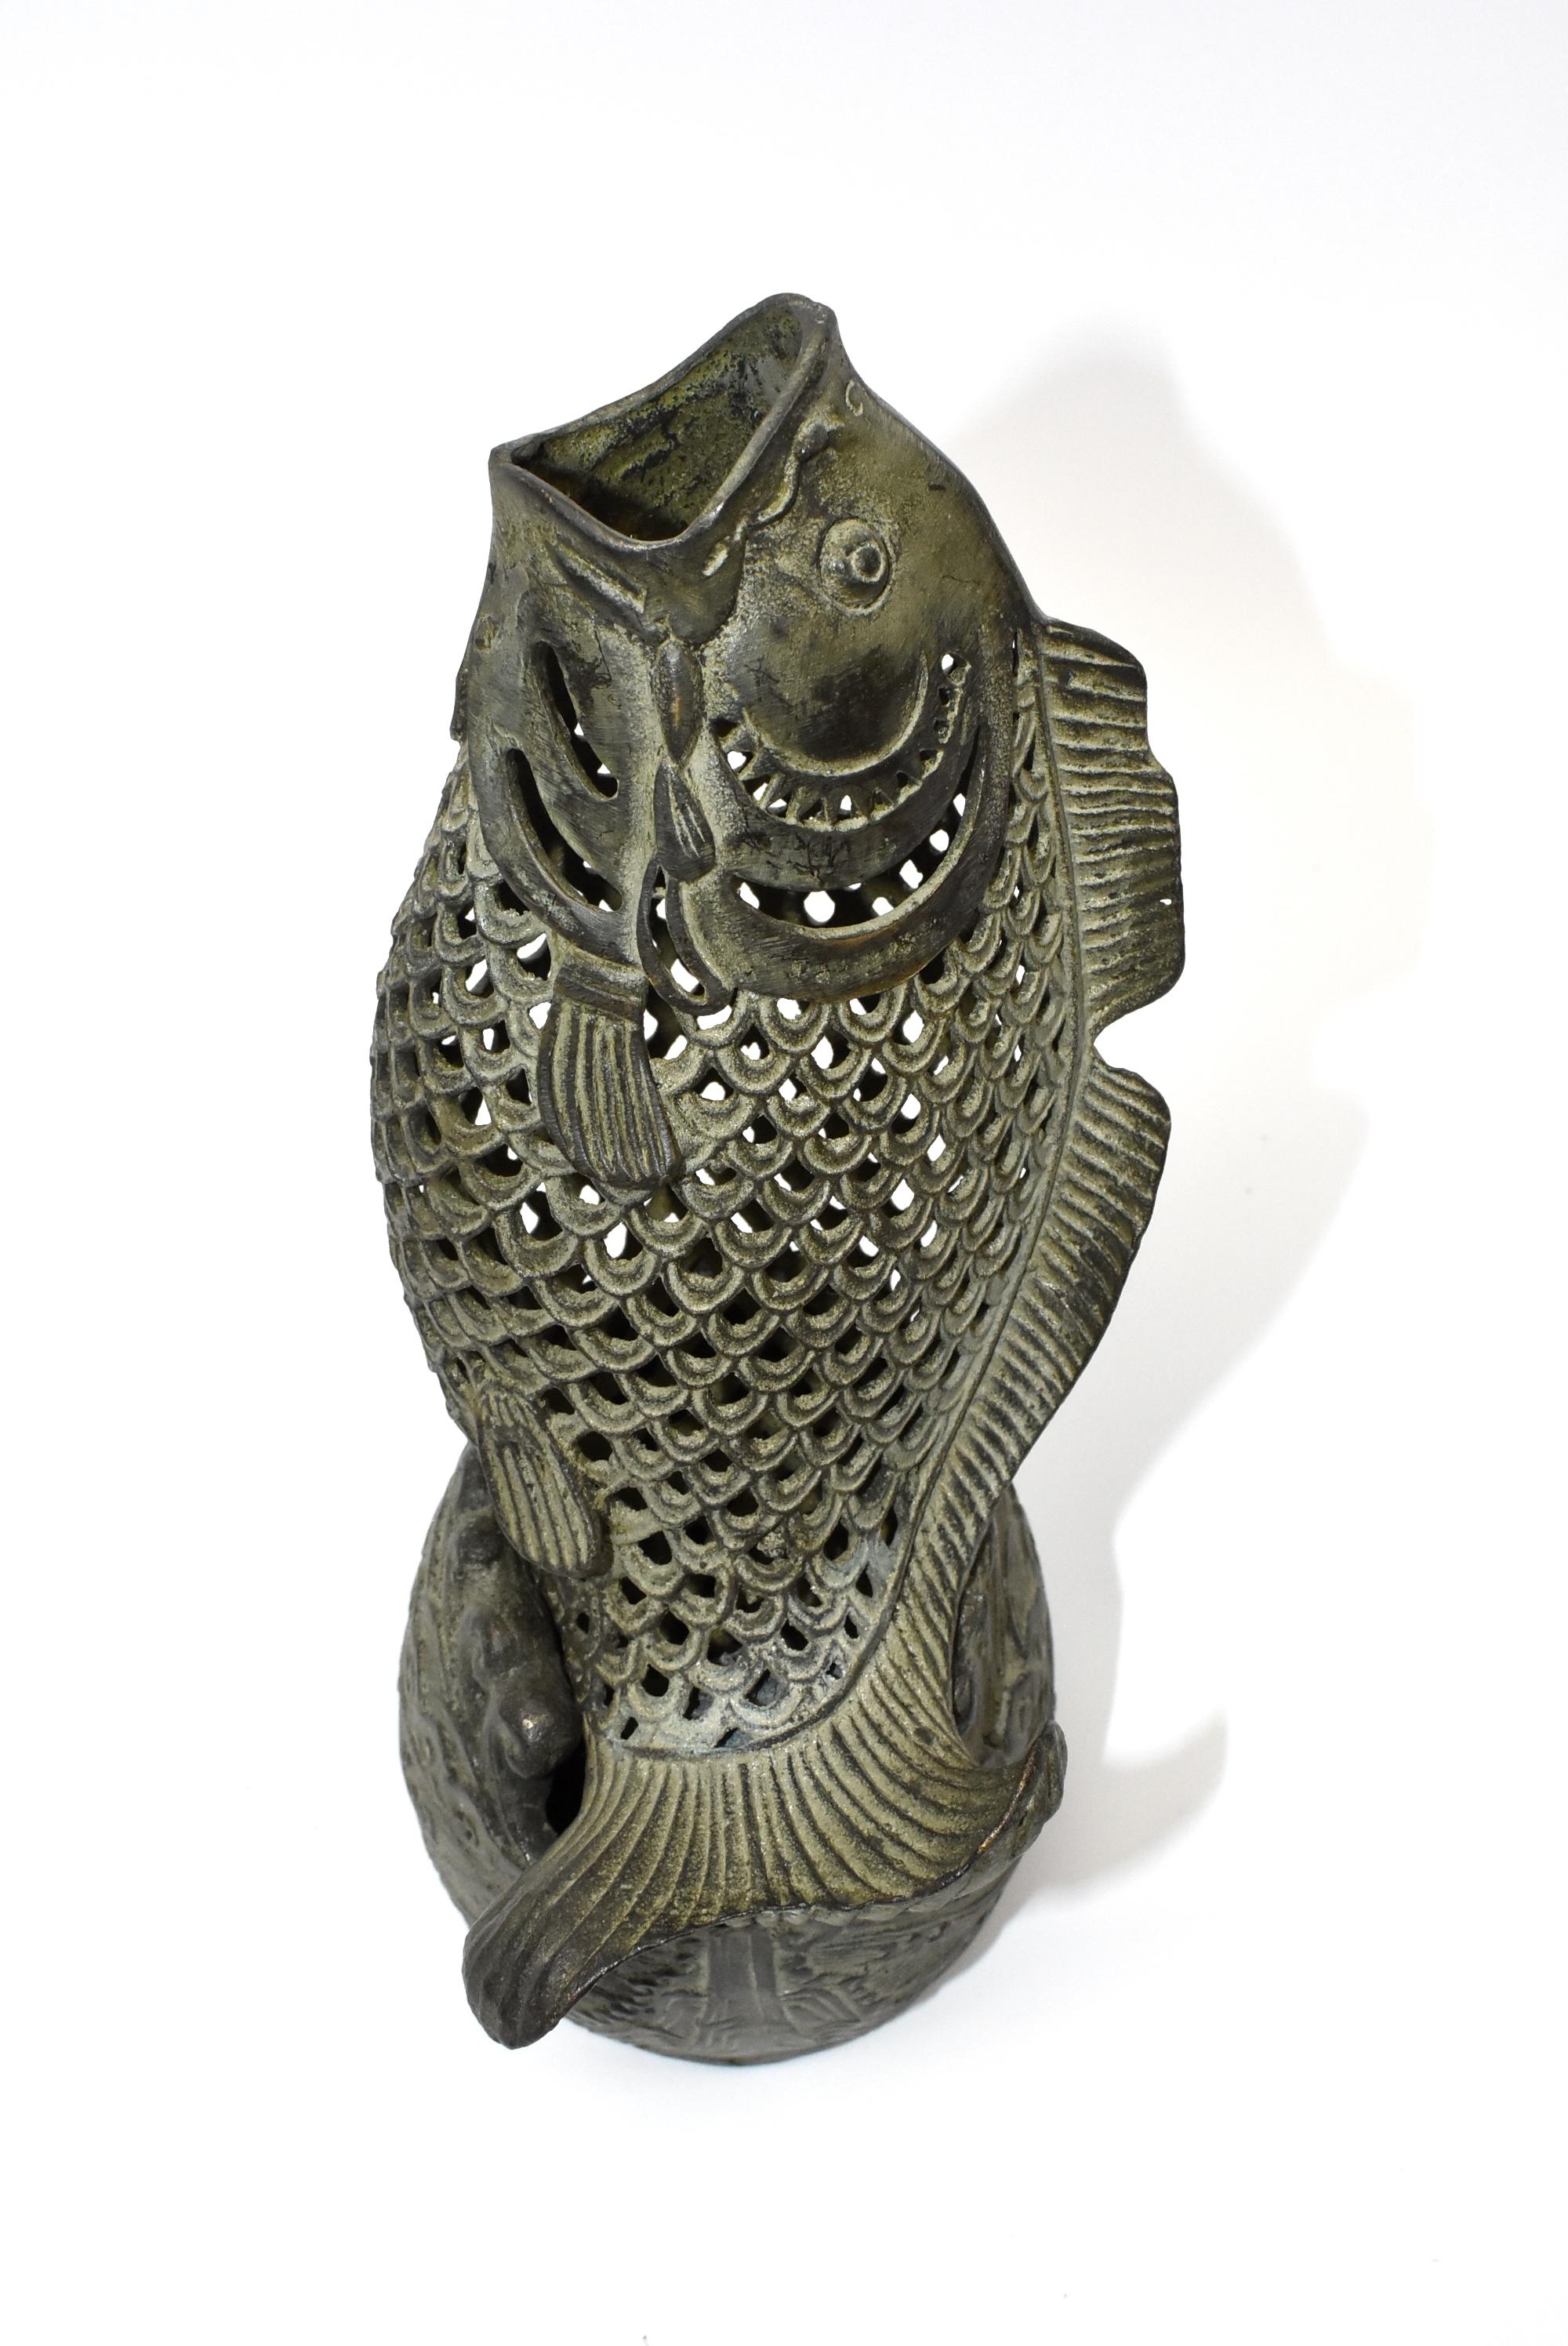 Super unique bronze fish incense burner is a delightful object the fish is the famed and prized oriental carp, which is symbol of prosperity and wealth. The base features waves and water pattern, which echoes the 